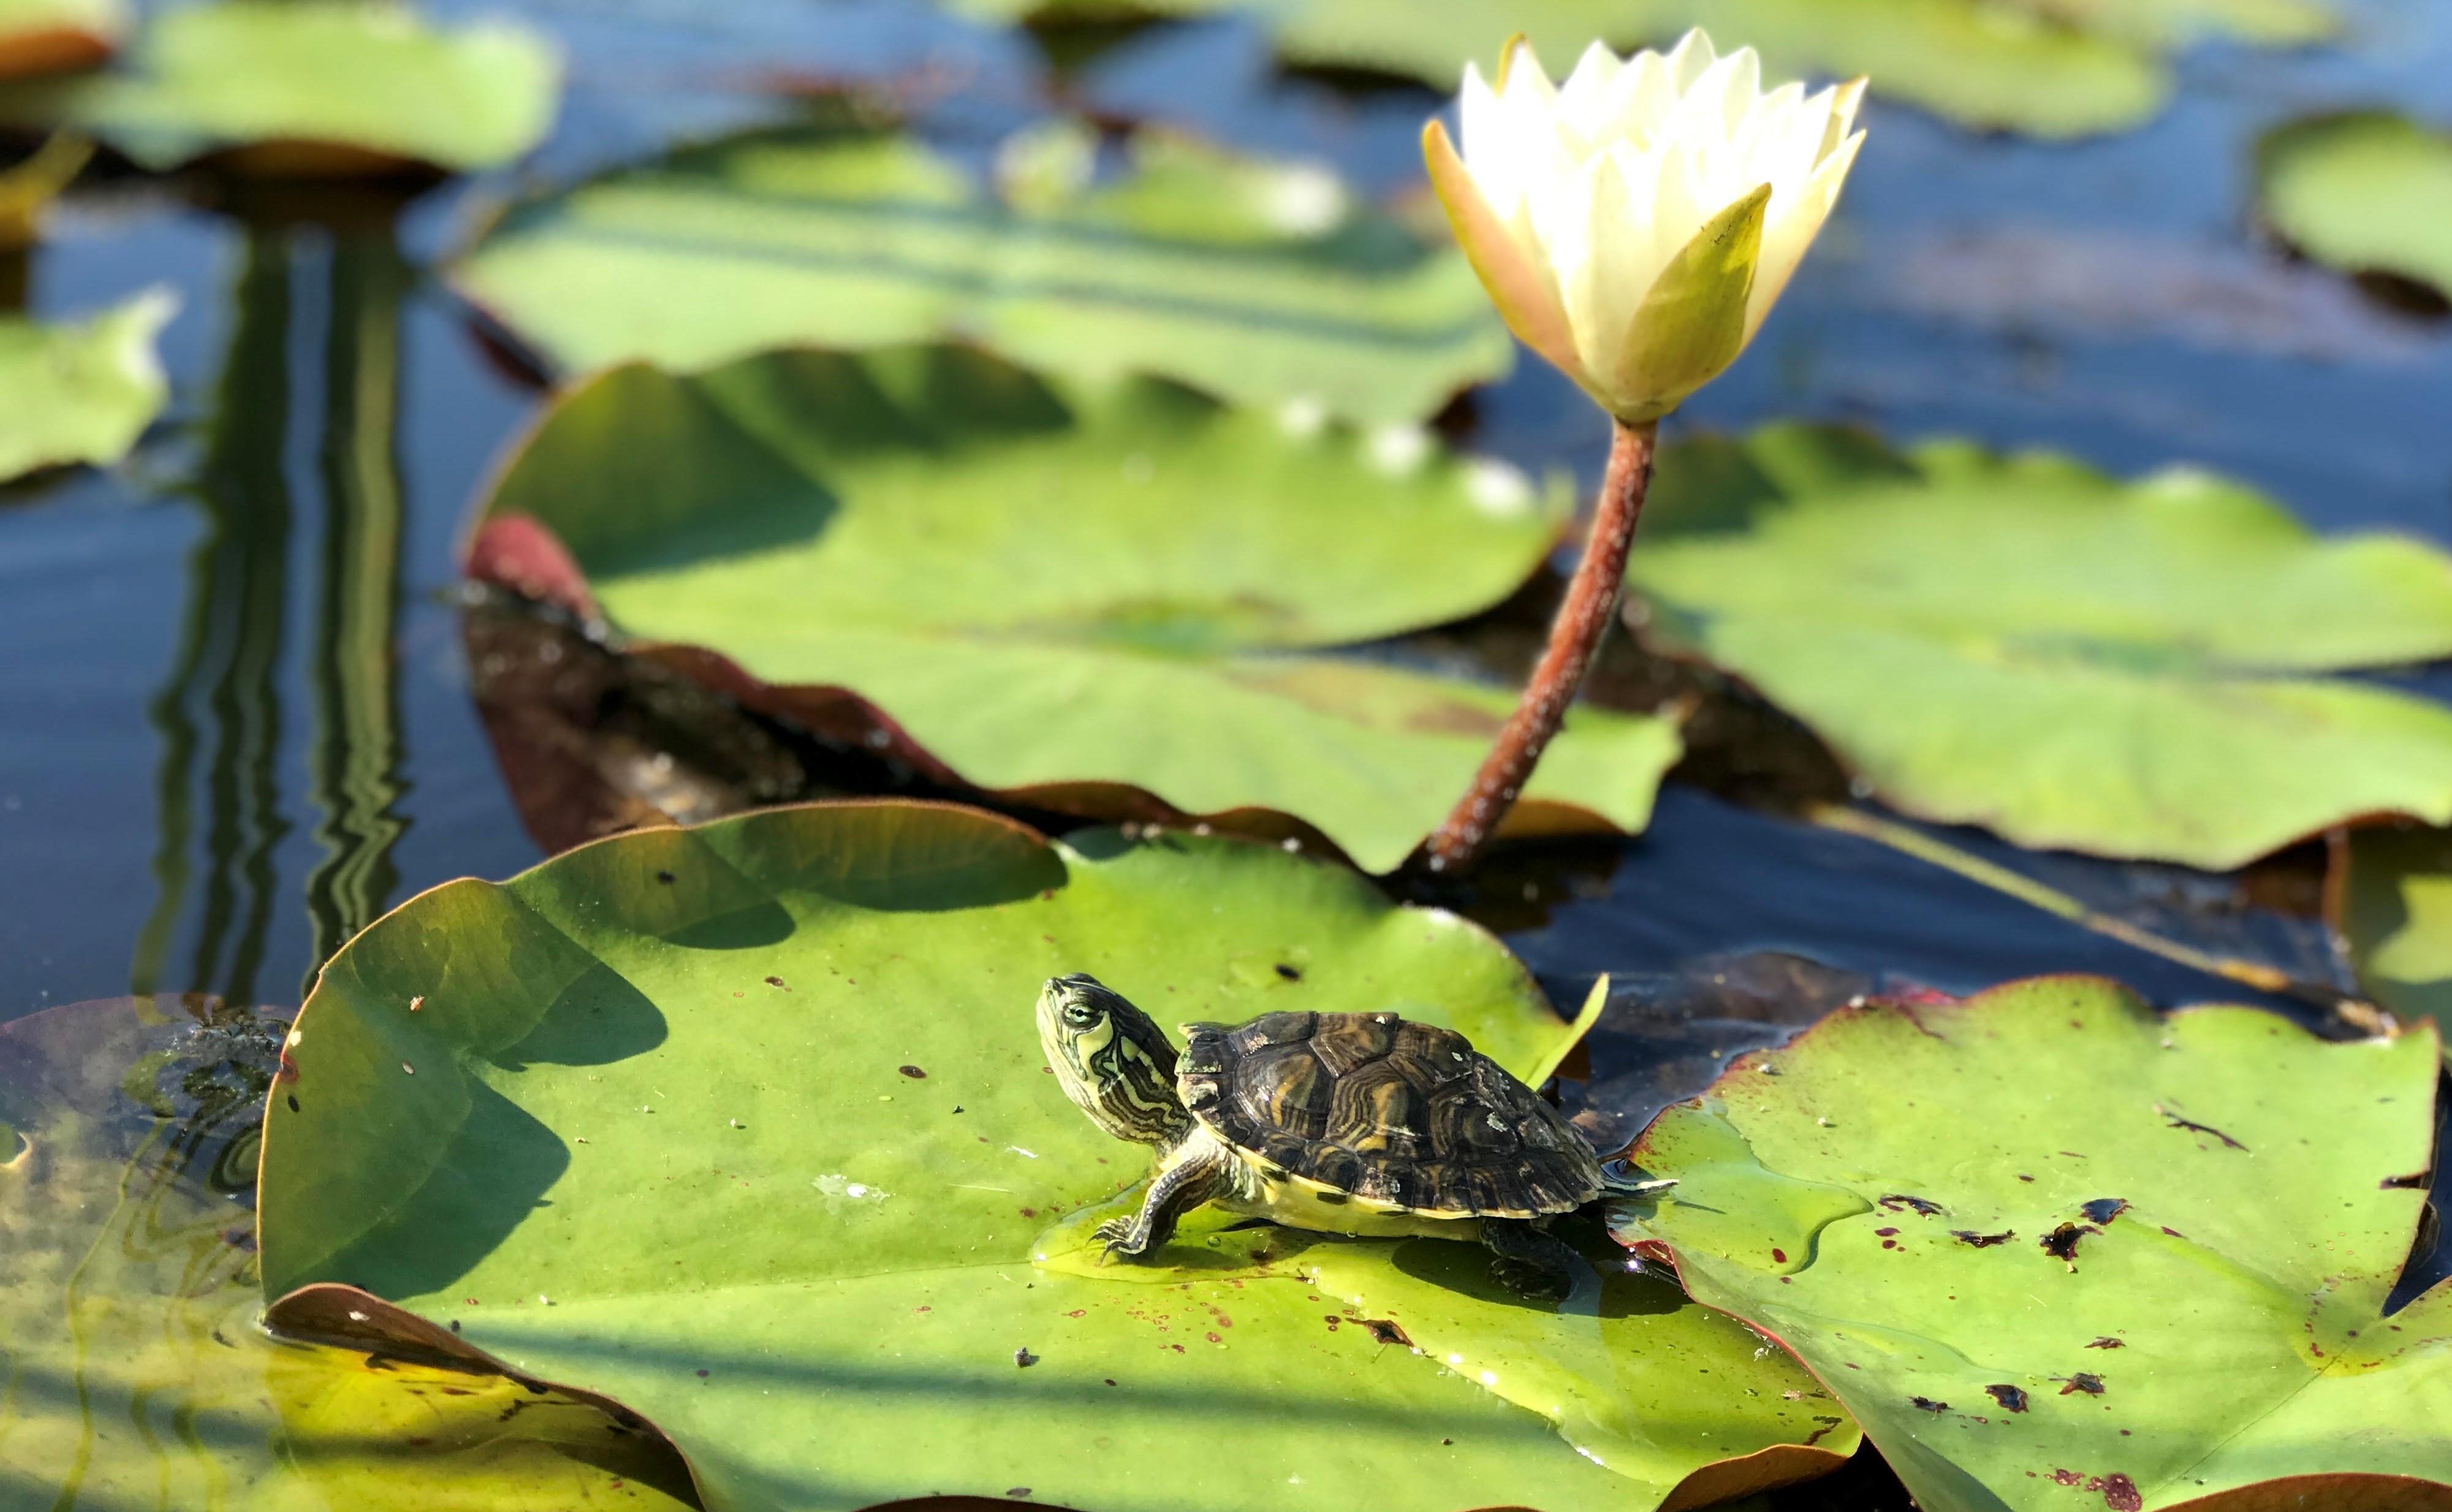 Yellow Bellied Slider in a Pond. Photo by Farren Dell